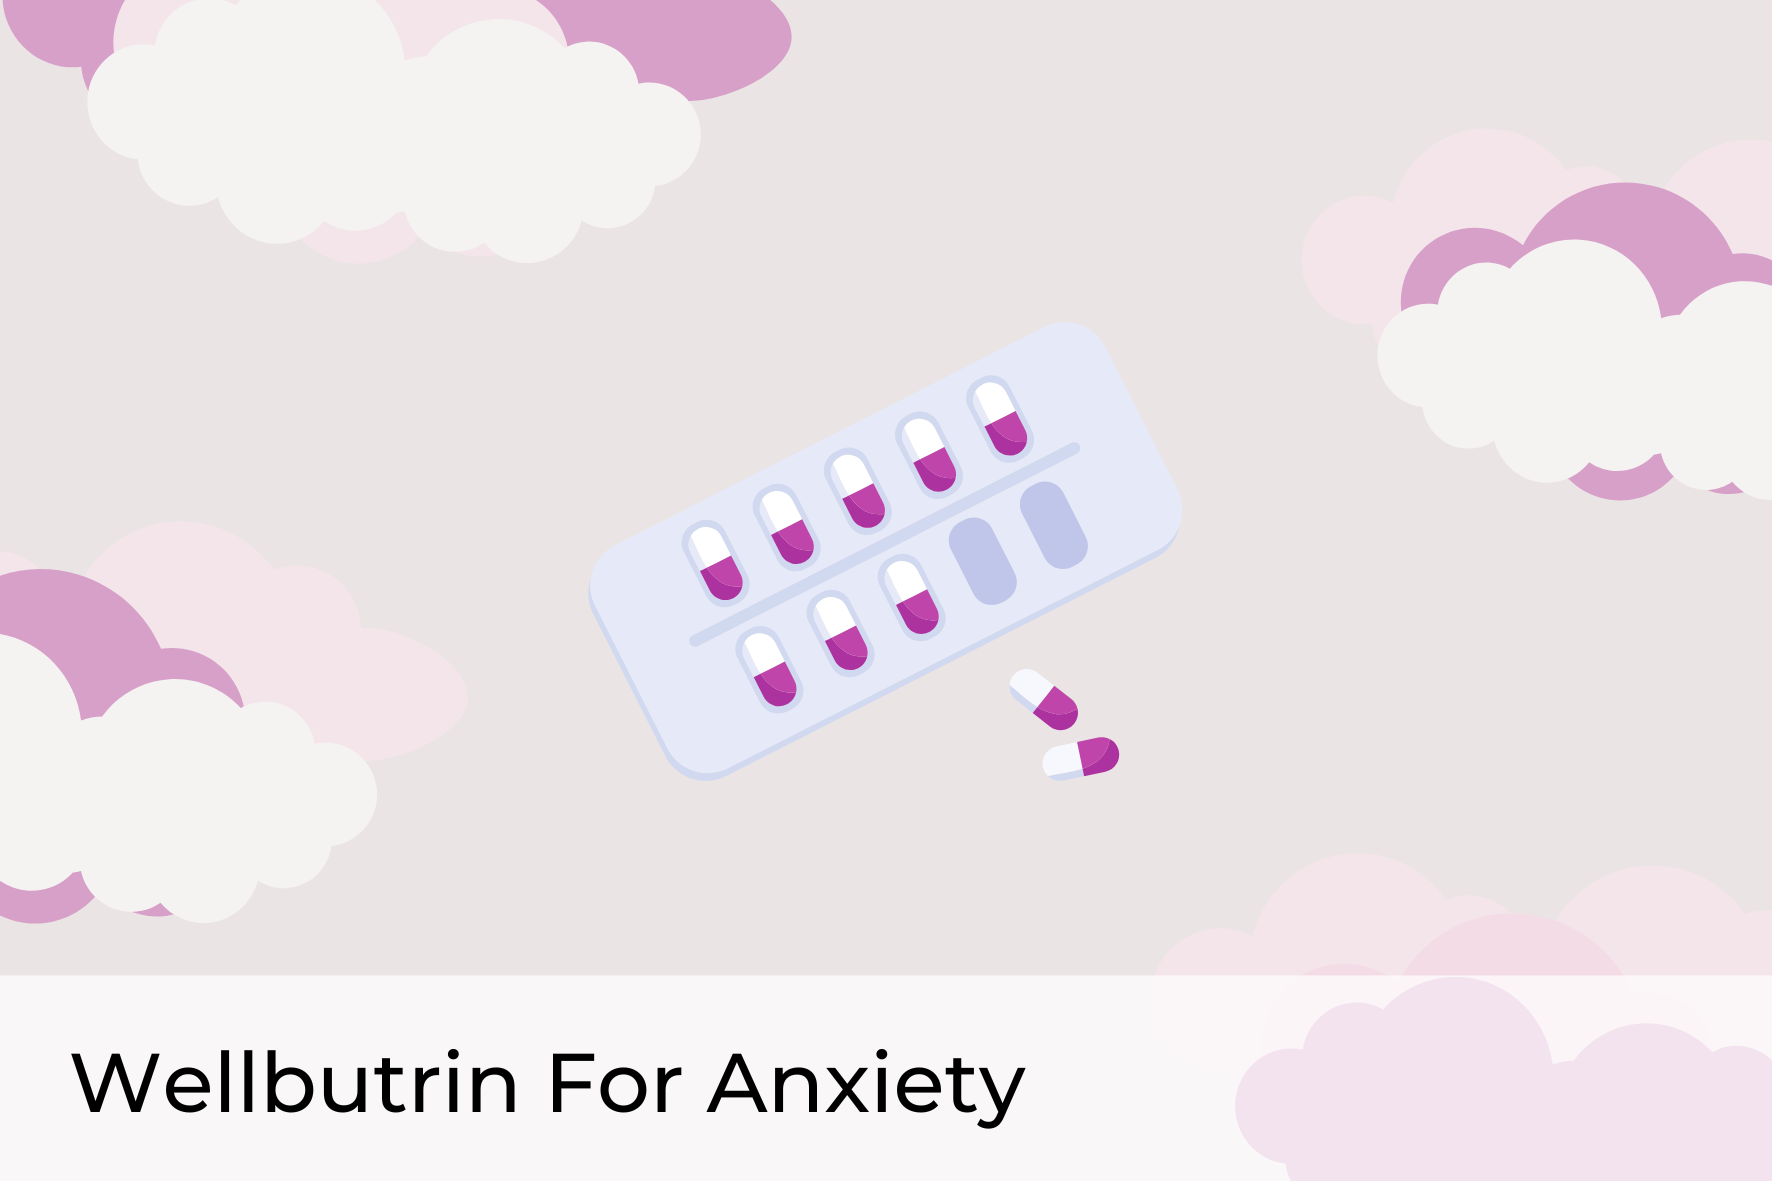 Wellbutrin for Anxiety